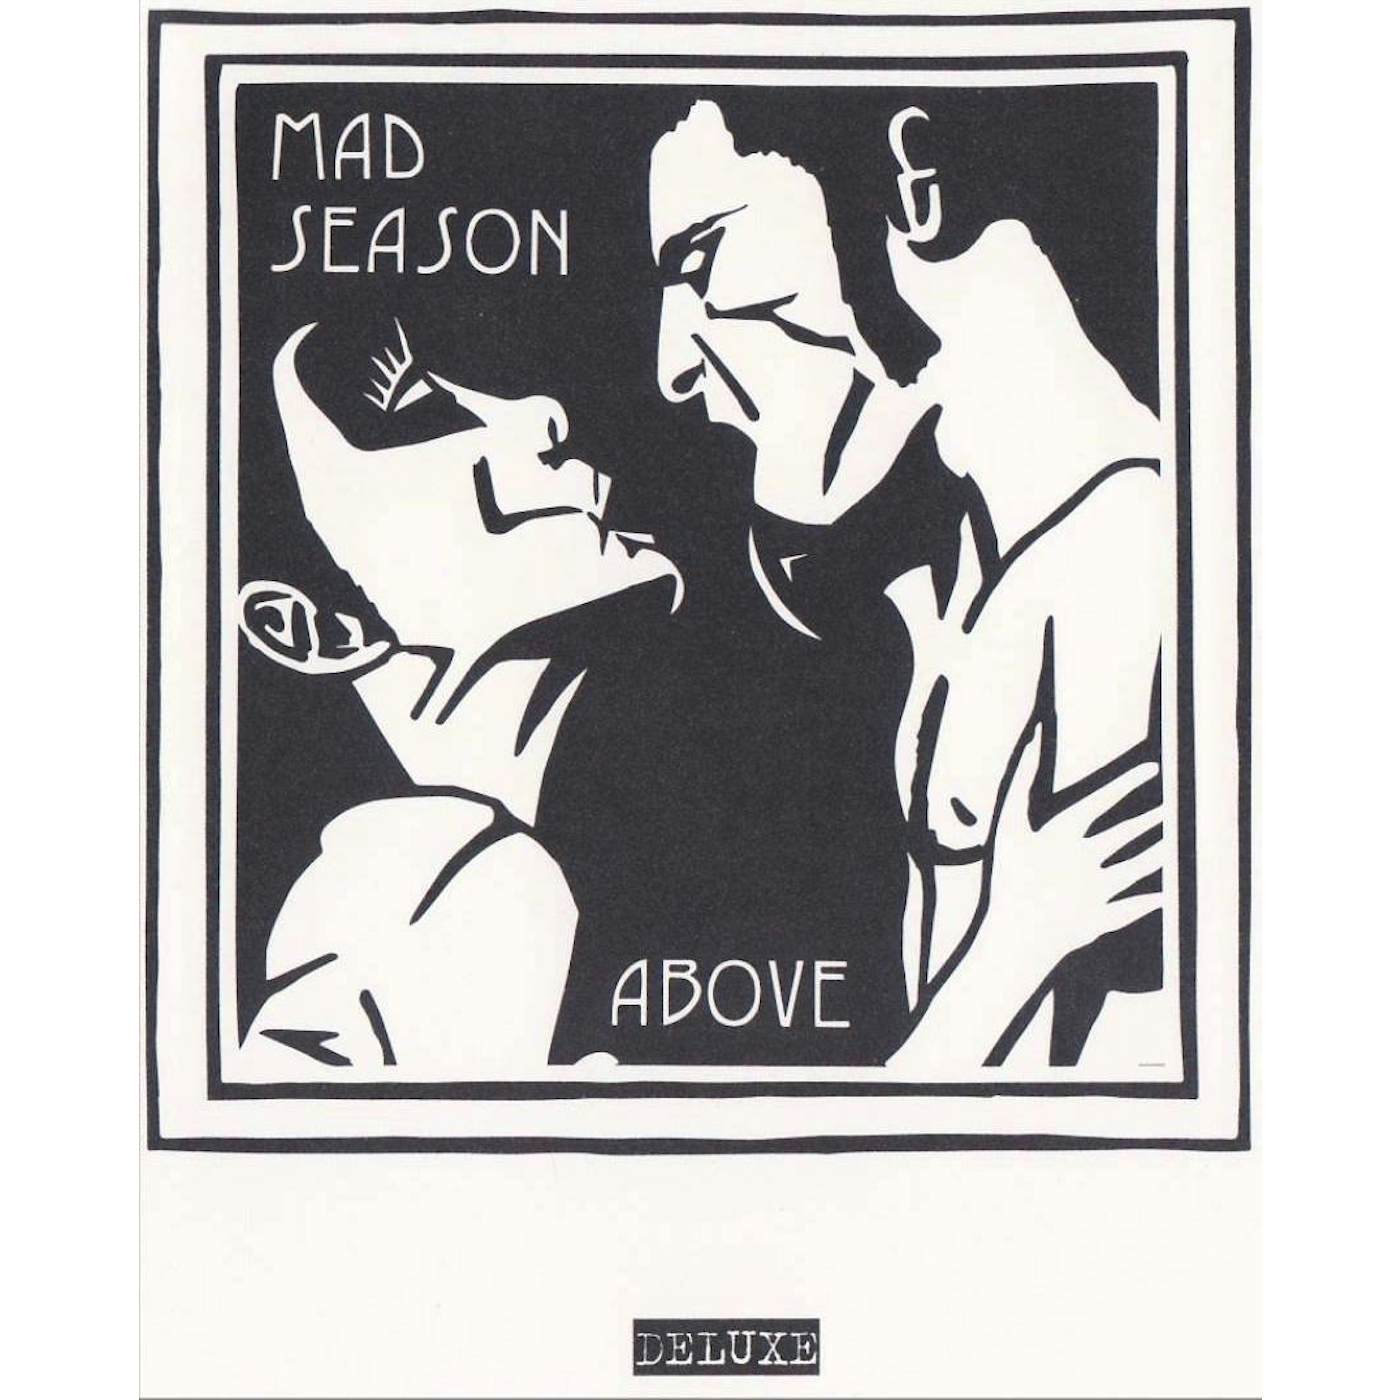 Pearl Jam MAD SEASON ABOVE DELUXE EDITION REISSUE